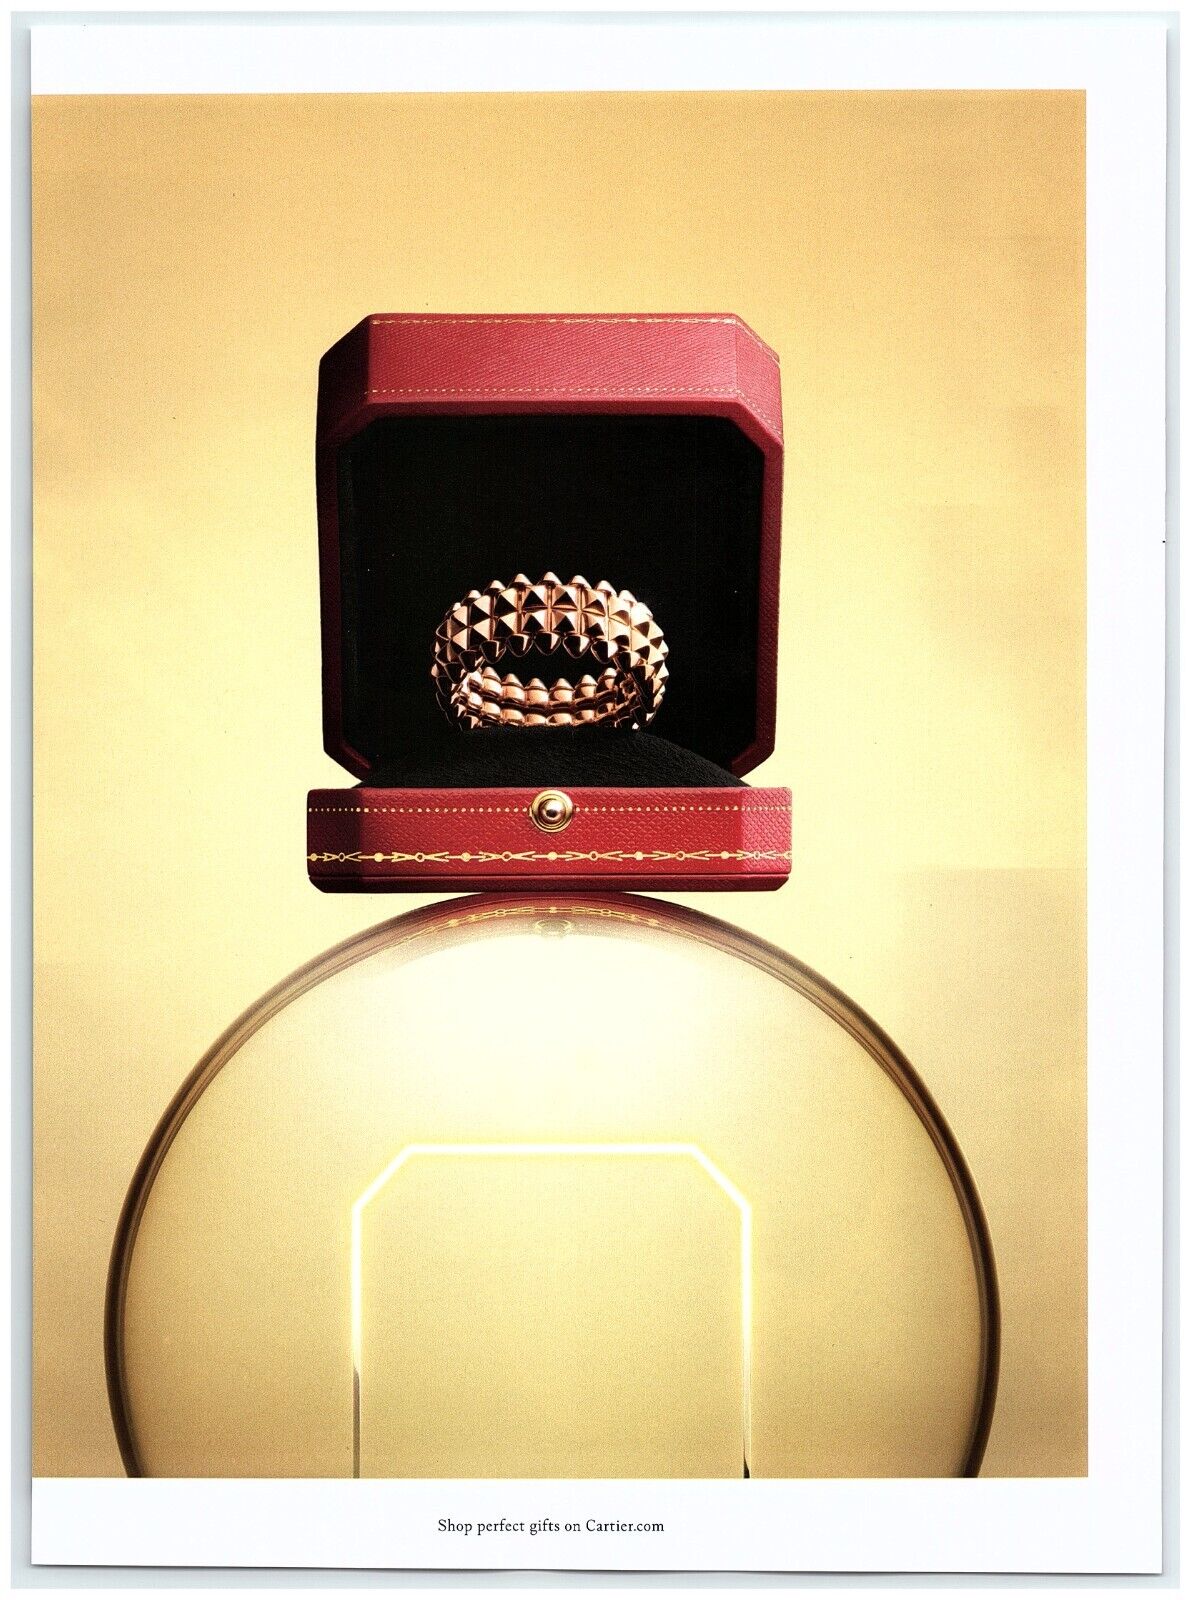 2022 Cartier Print Ad, Rose Gold Clash de Cartier Ring Red Box Stylish Luxury